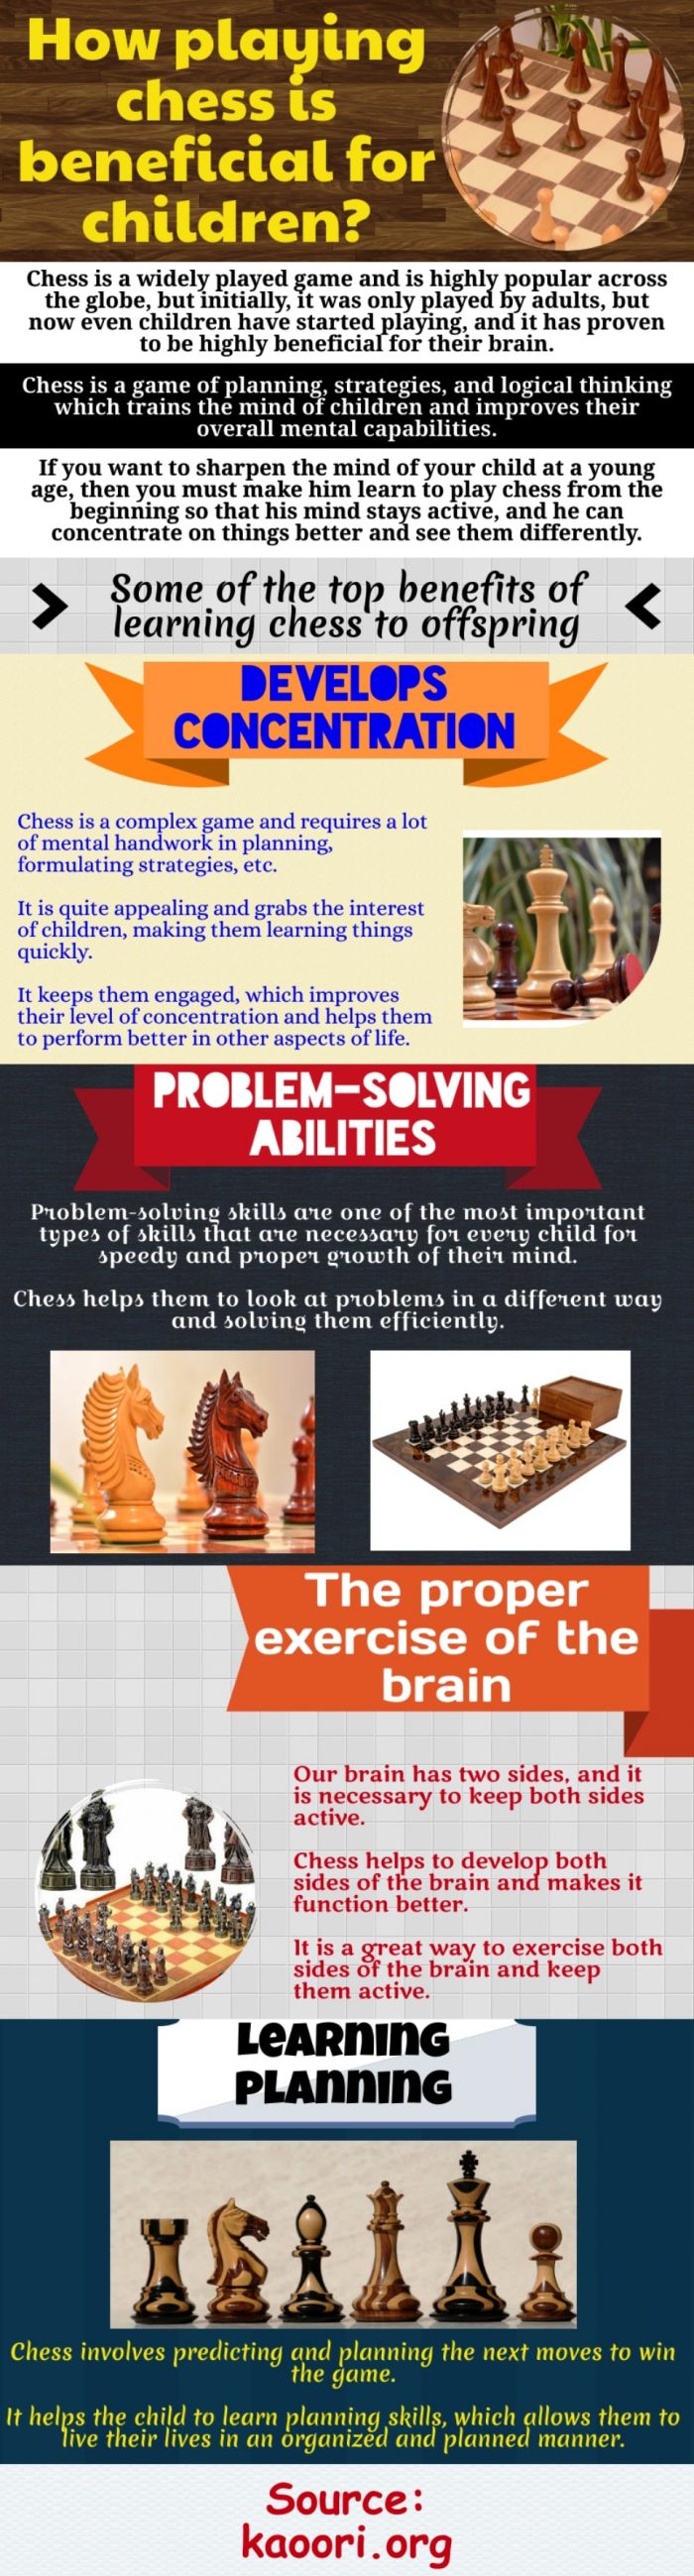 Everyone must learn to play chess and practice it regularly to keep their minds active